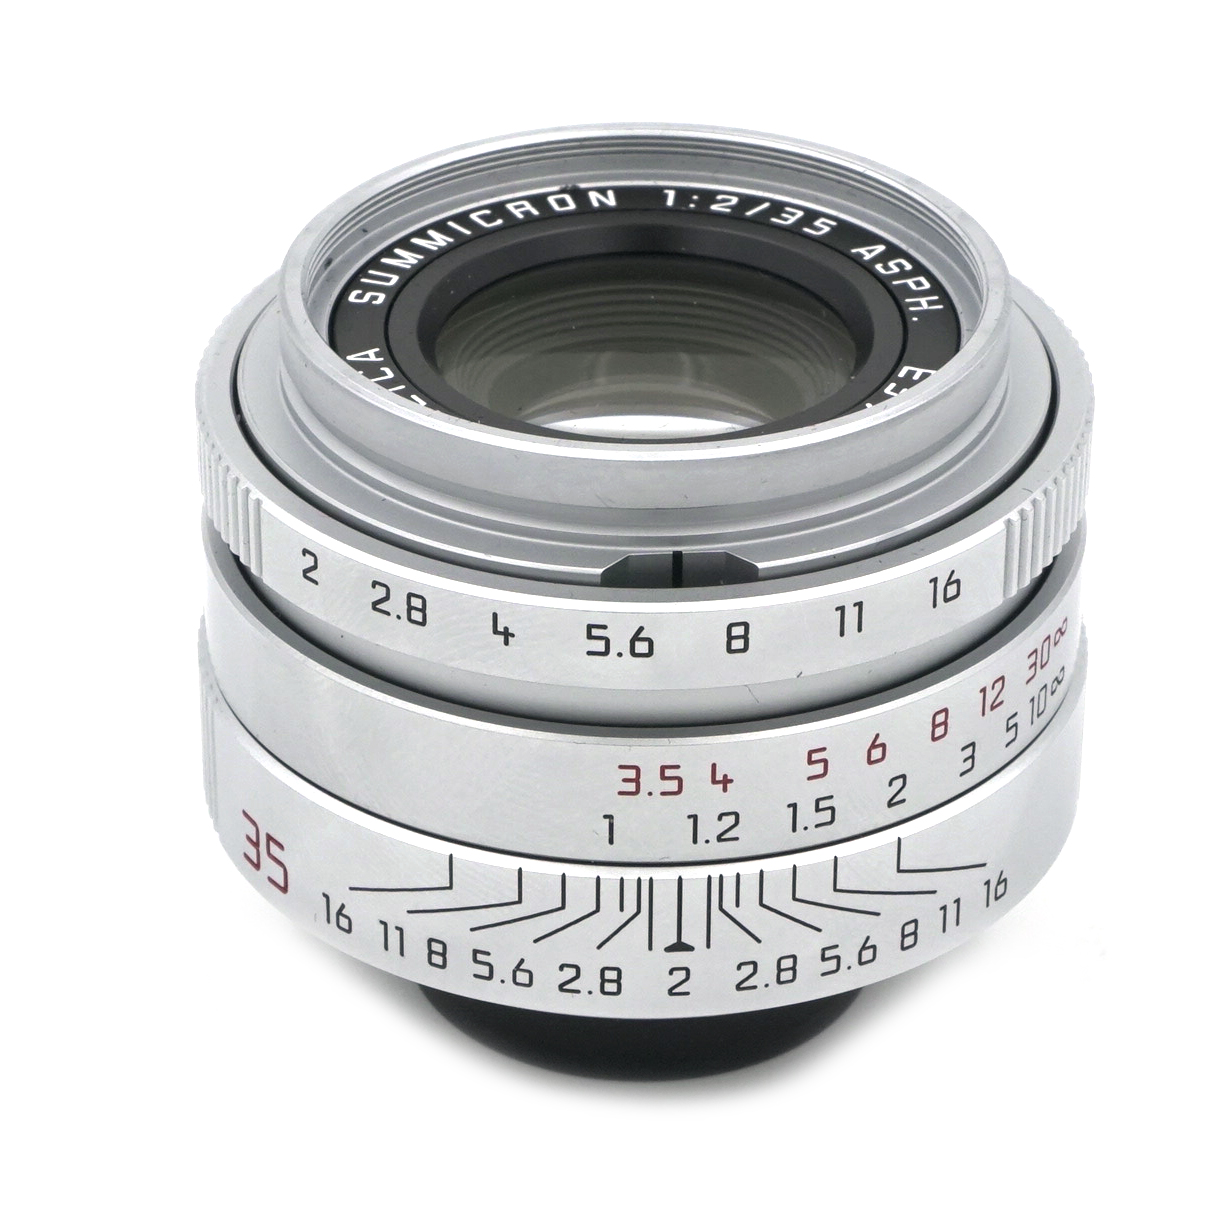 Leica Summicron 35mm f/2.0 Leica-M ASPH. Chrome Screw in M39 Mount (11608)  - Pre-Owned